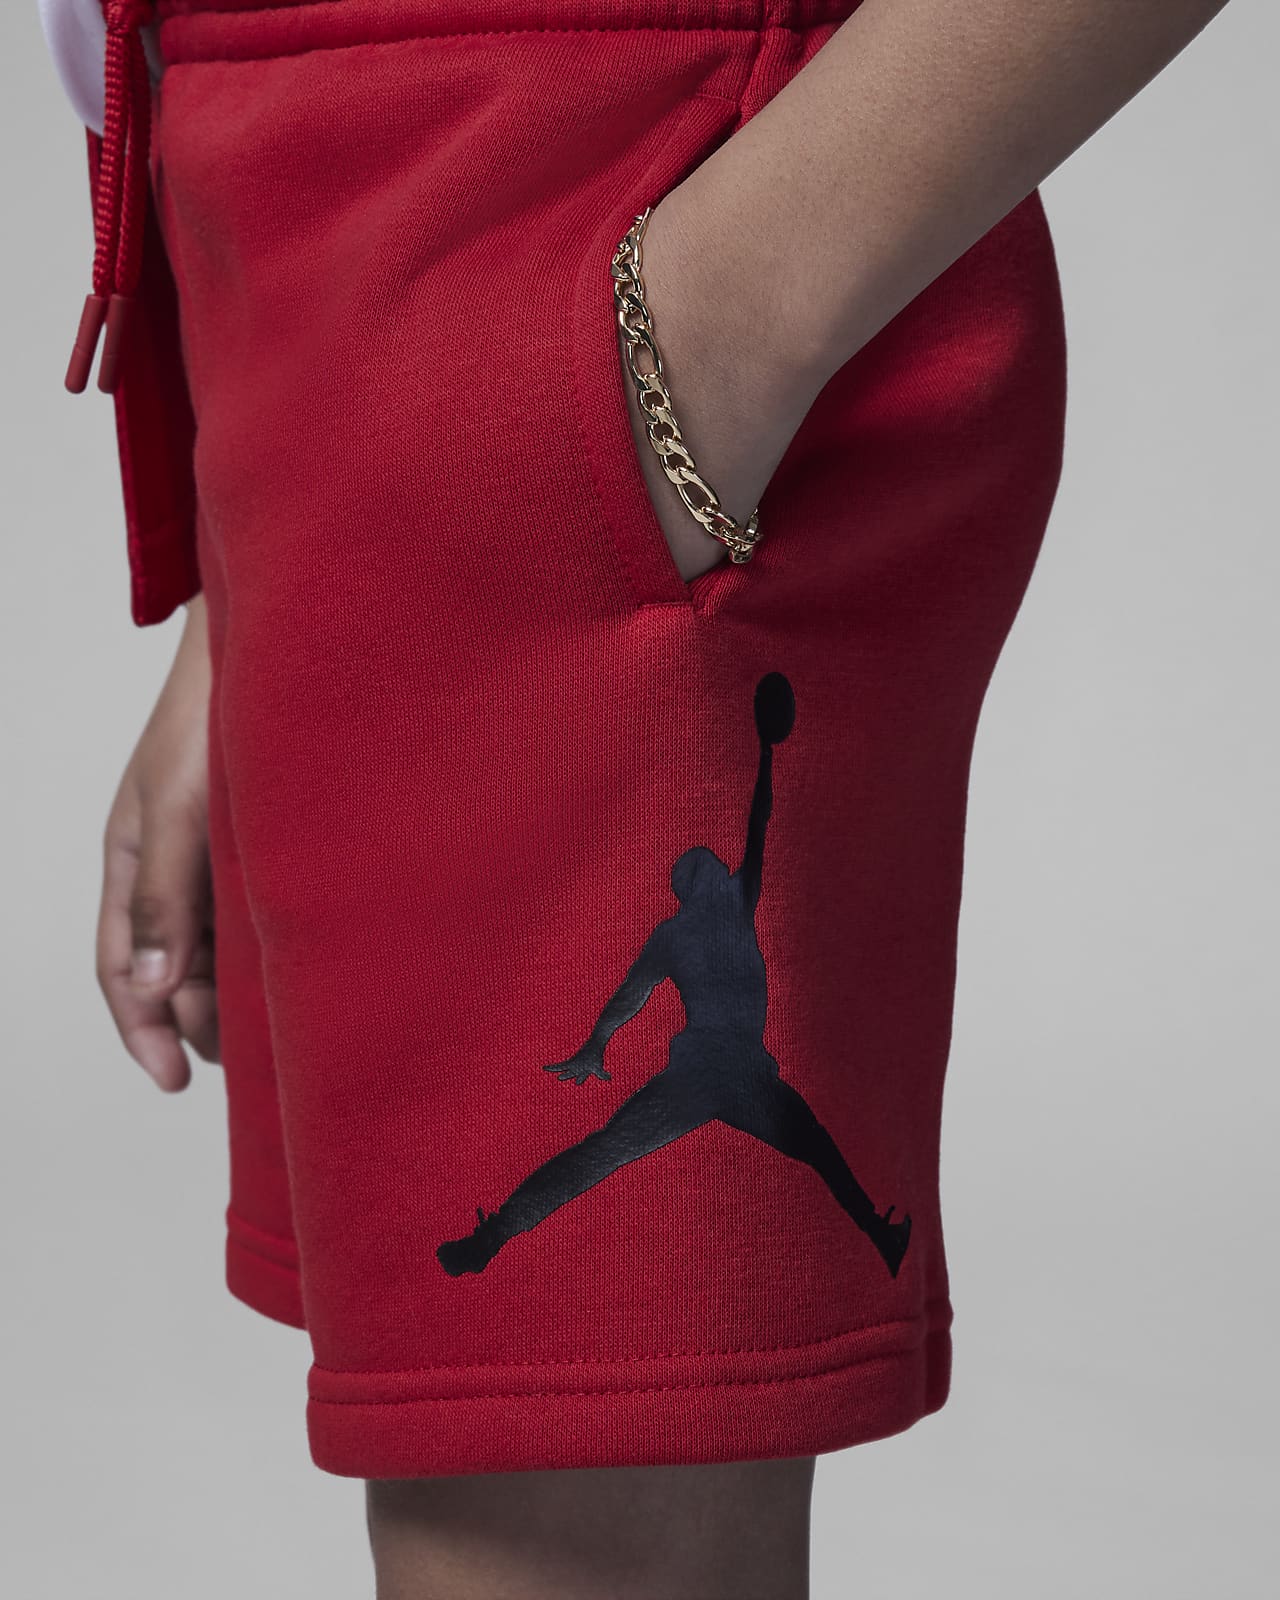  Nike Air Jordan Remix Backpack (One Size, Gym Red) : Clothing,  Shoes & Jewelry